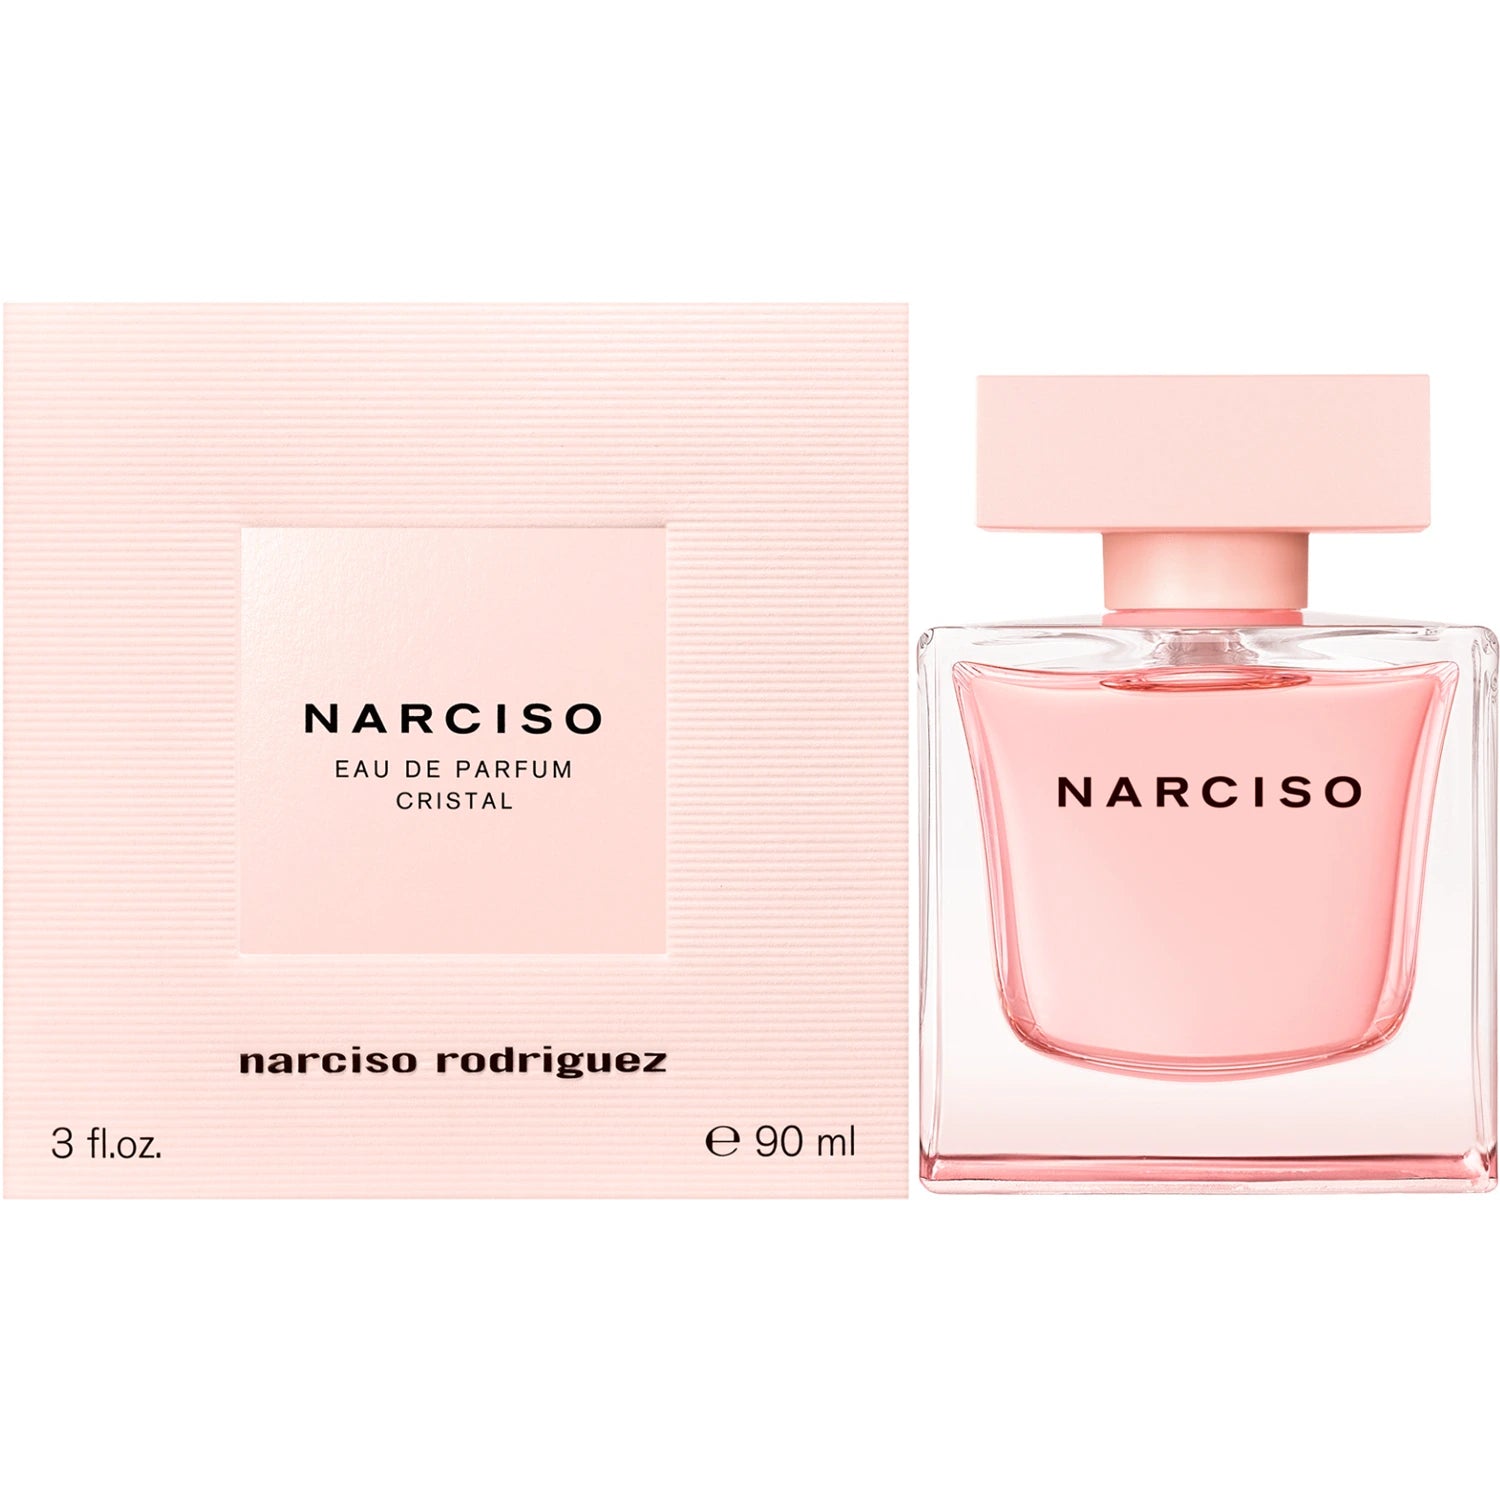 <b data-mce-fragment="1">Narciso Eau de Parfum Cristal</b><span data-mce-fragment="1"> by </span><b data-mce-fragment="1">Narciso Rodriguez</b><span data-mce-fragment="1"> is a Floral Woody Musk fragrance for women. This is a new fragrance. </span><b data-mce-fragment="1">Narciso Eau de Parfum Cristal</b><span data-mce-fragment="1"> was launched in 2022. The nose behind this fragrance is Natalie Gracia-Cetto. Top notes are Freesia, Orange Blossom and Bergamot; middle notes are Musk, White Flowers, Rose and Jasmine; base notes are Cashmeran, Cedar, Amber and Benzoin.</span>